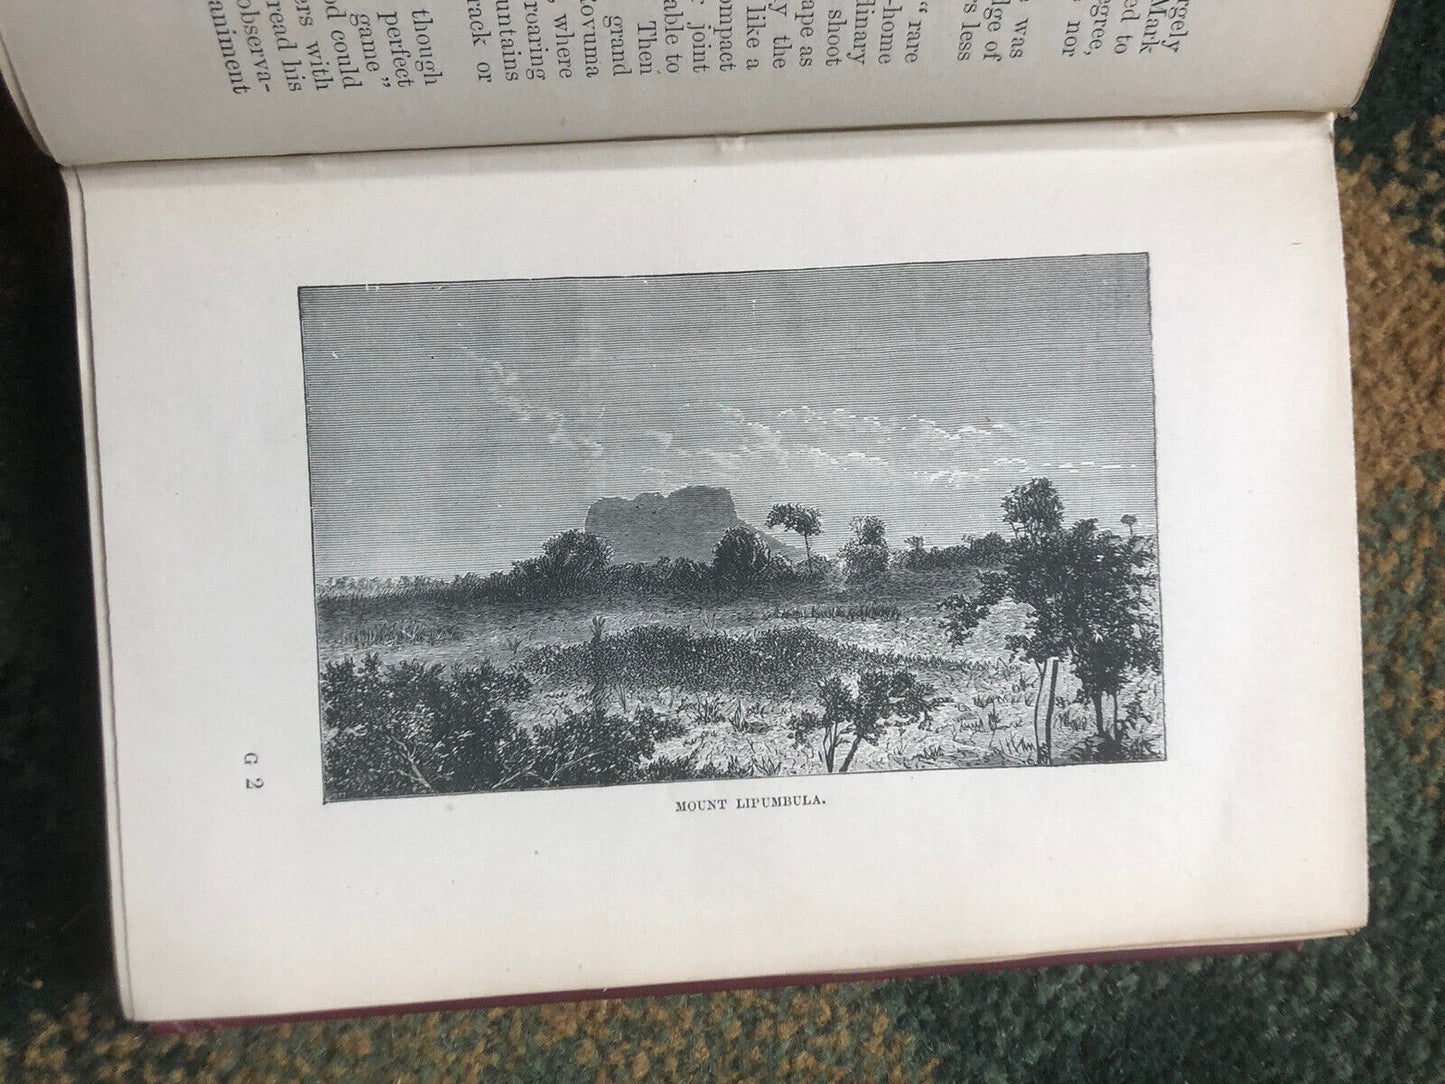 Joseph Thomson African Explorer A Biography by His Brother Rev J B Thomson 1897